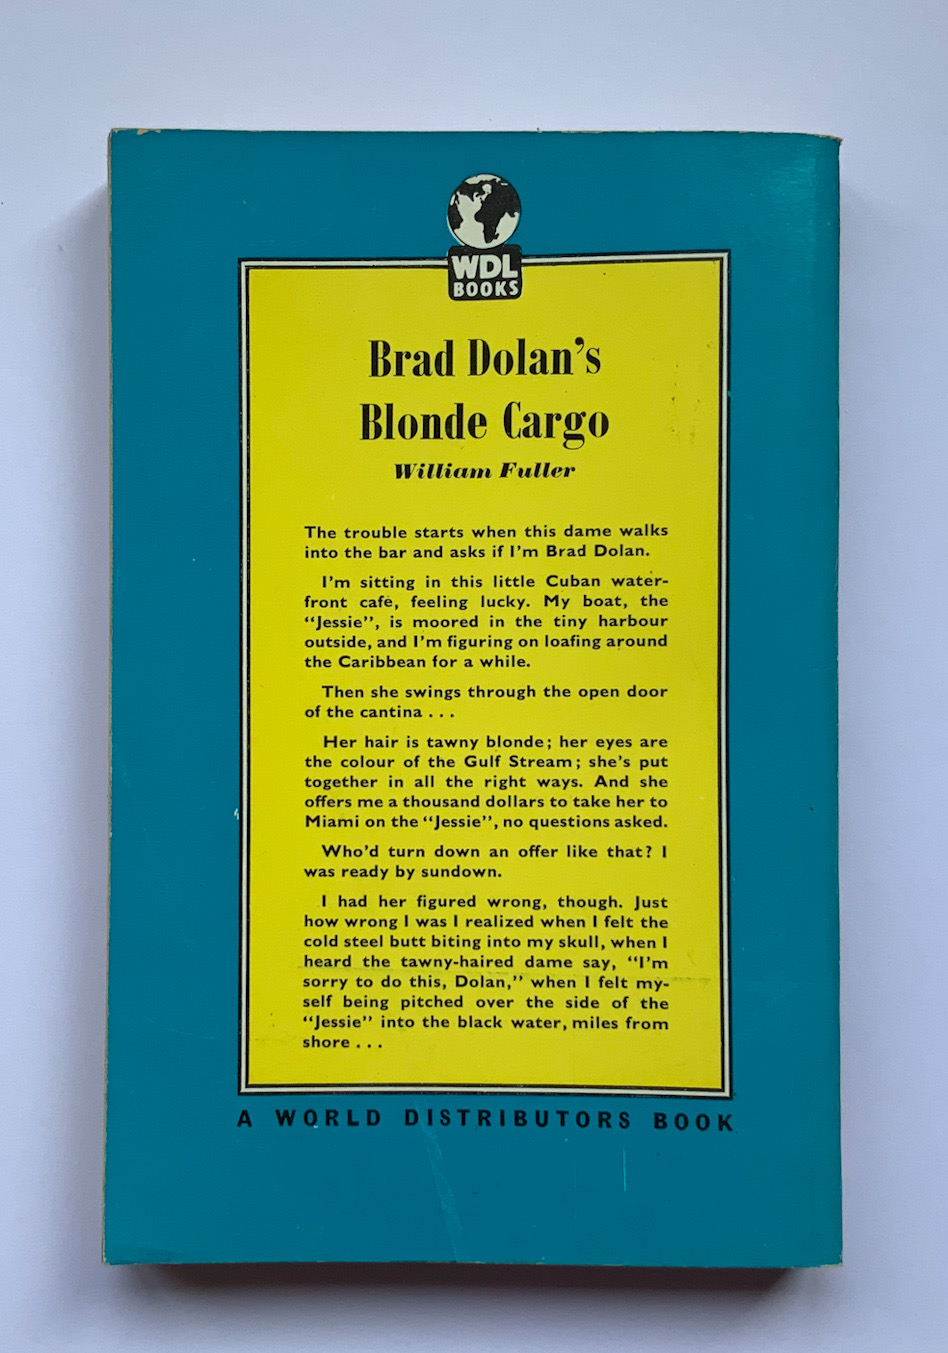 BRAD DOLAN'S BLONDE CARGO crime pulp fiction book by William Fuller 1959